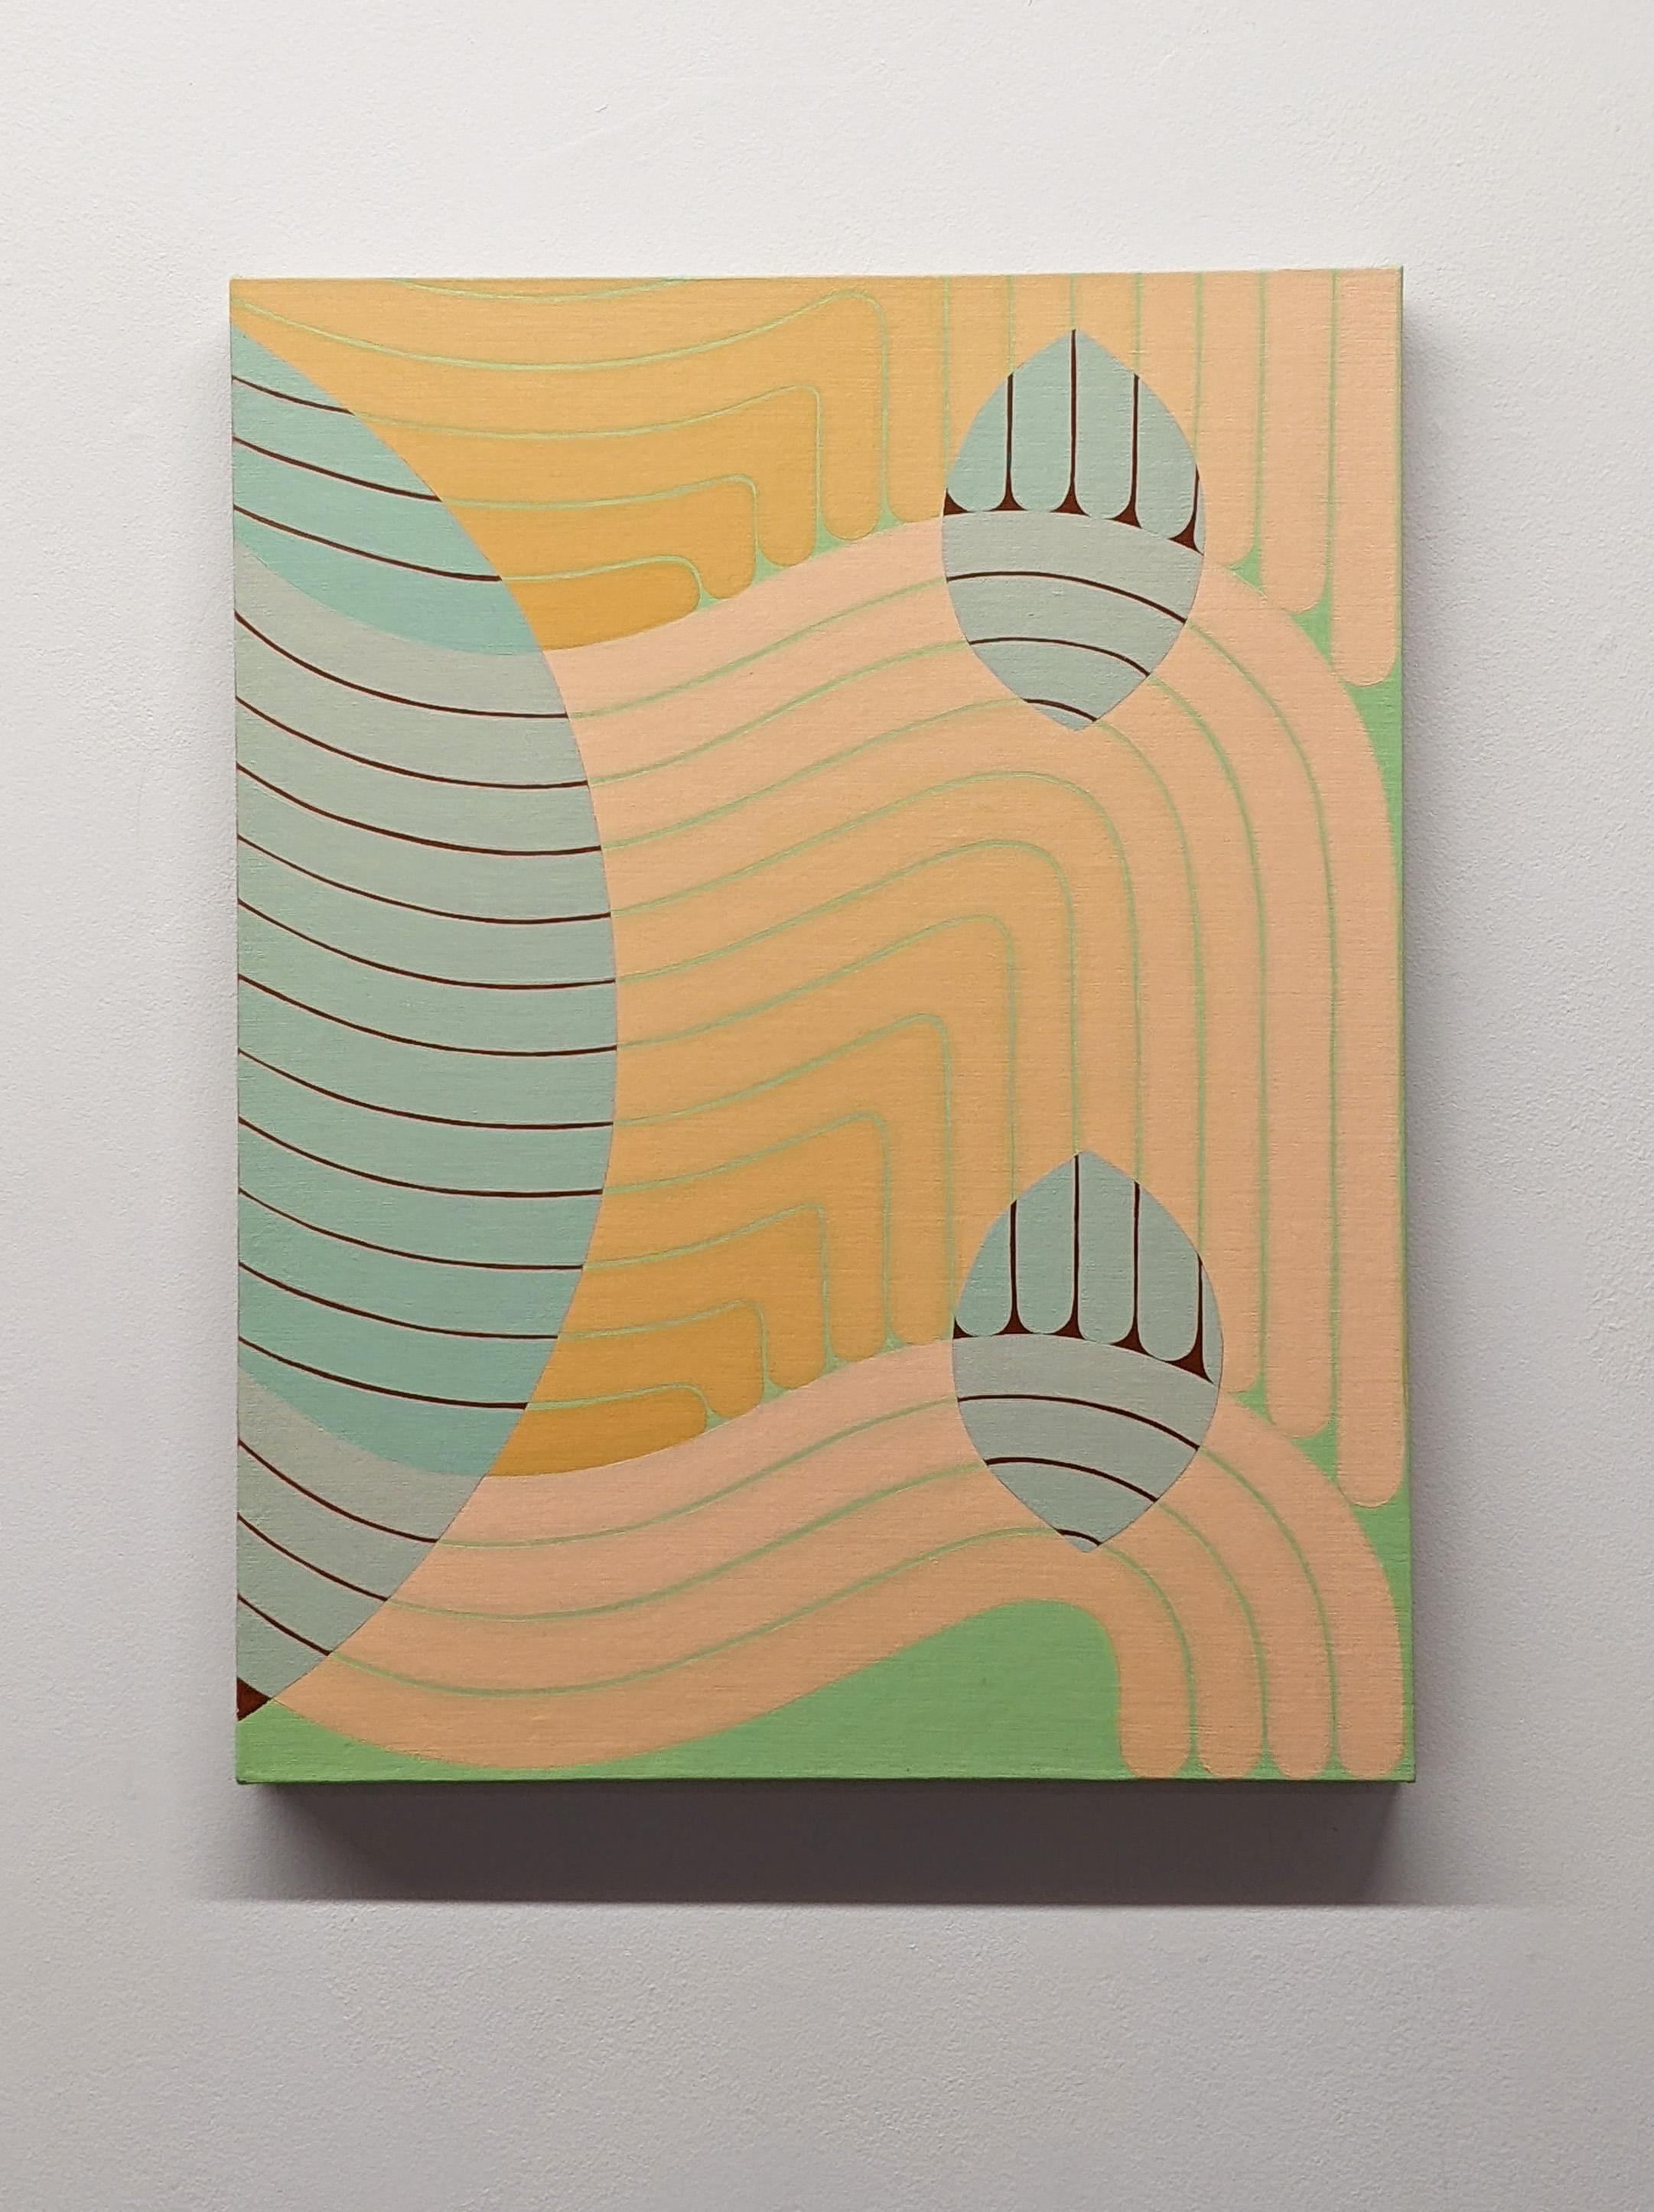 Tandem, Peach, Mint Blue, Light Green Geometric Abstract Painting, Curving Lines For Sale 1